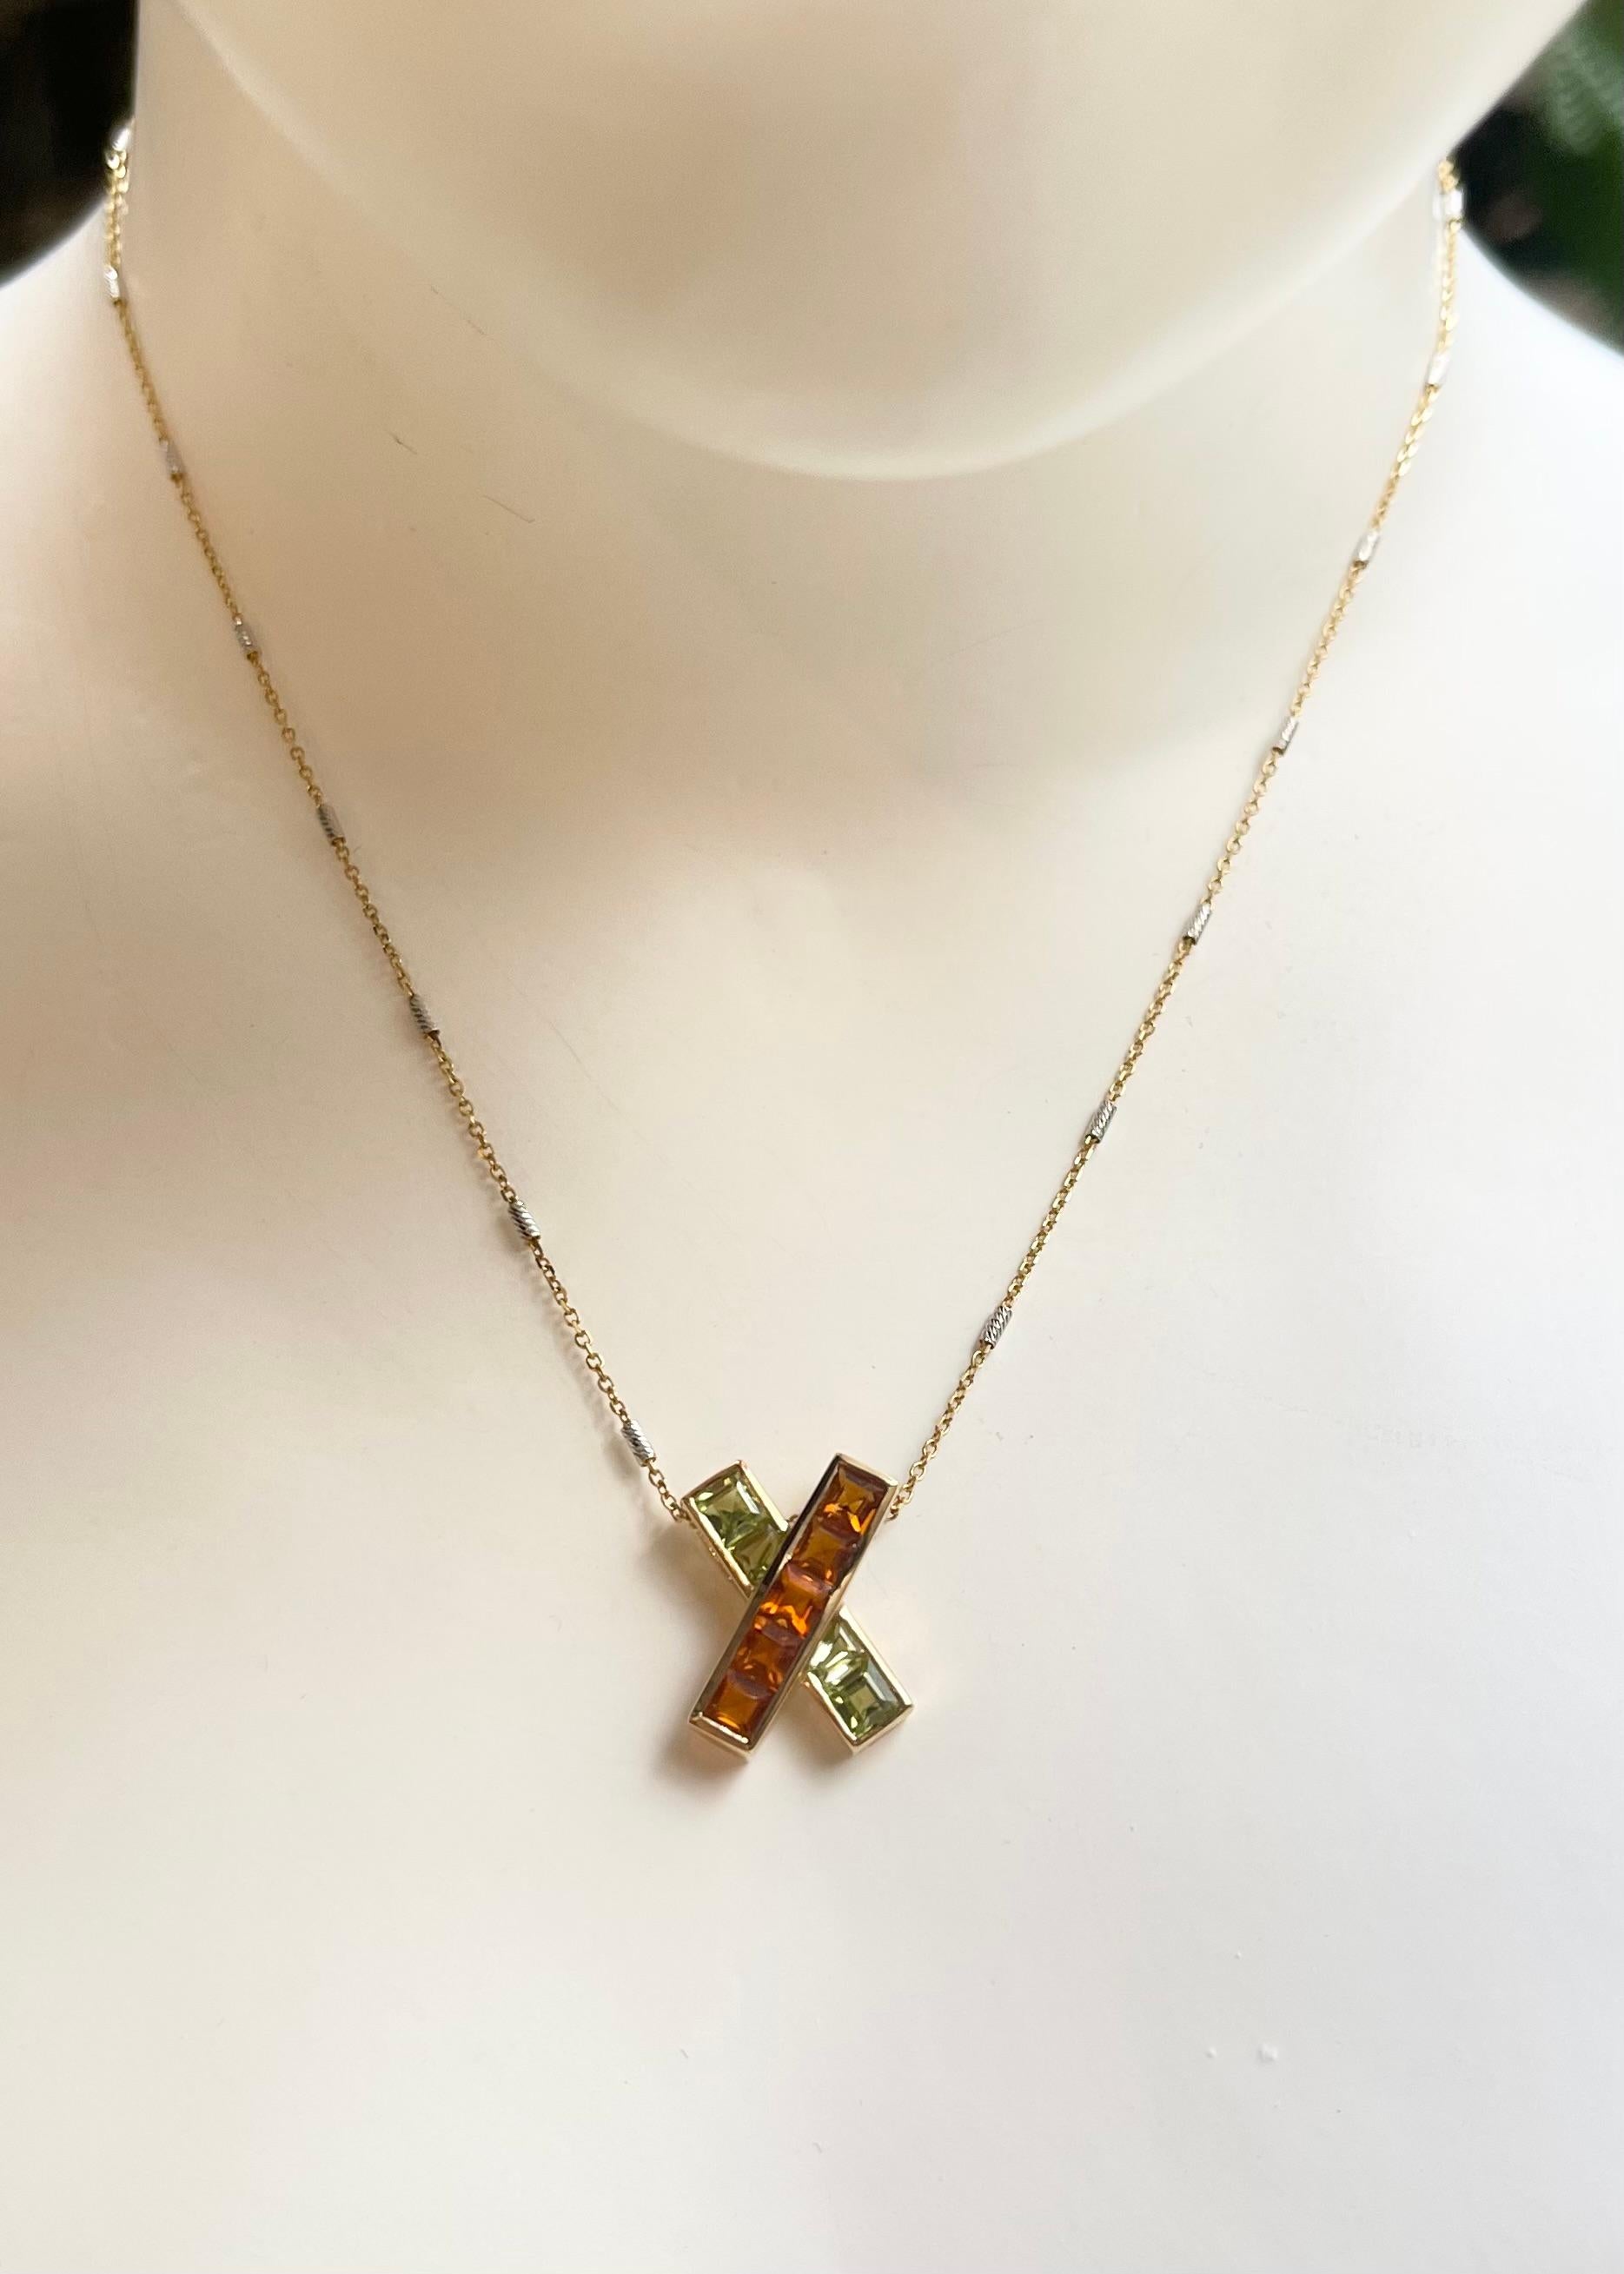 Peridot and Citrine 2.50 carats Pendant set in 14K Gold Settings
(chain not included)

Width: 1.4 cm 
Length: 1.9 cm
Total Weight: 2.71 grams

